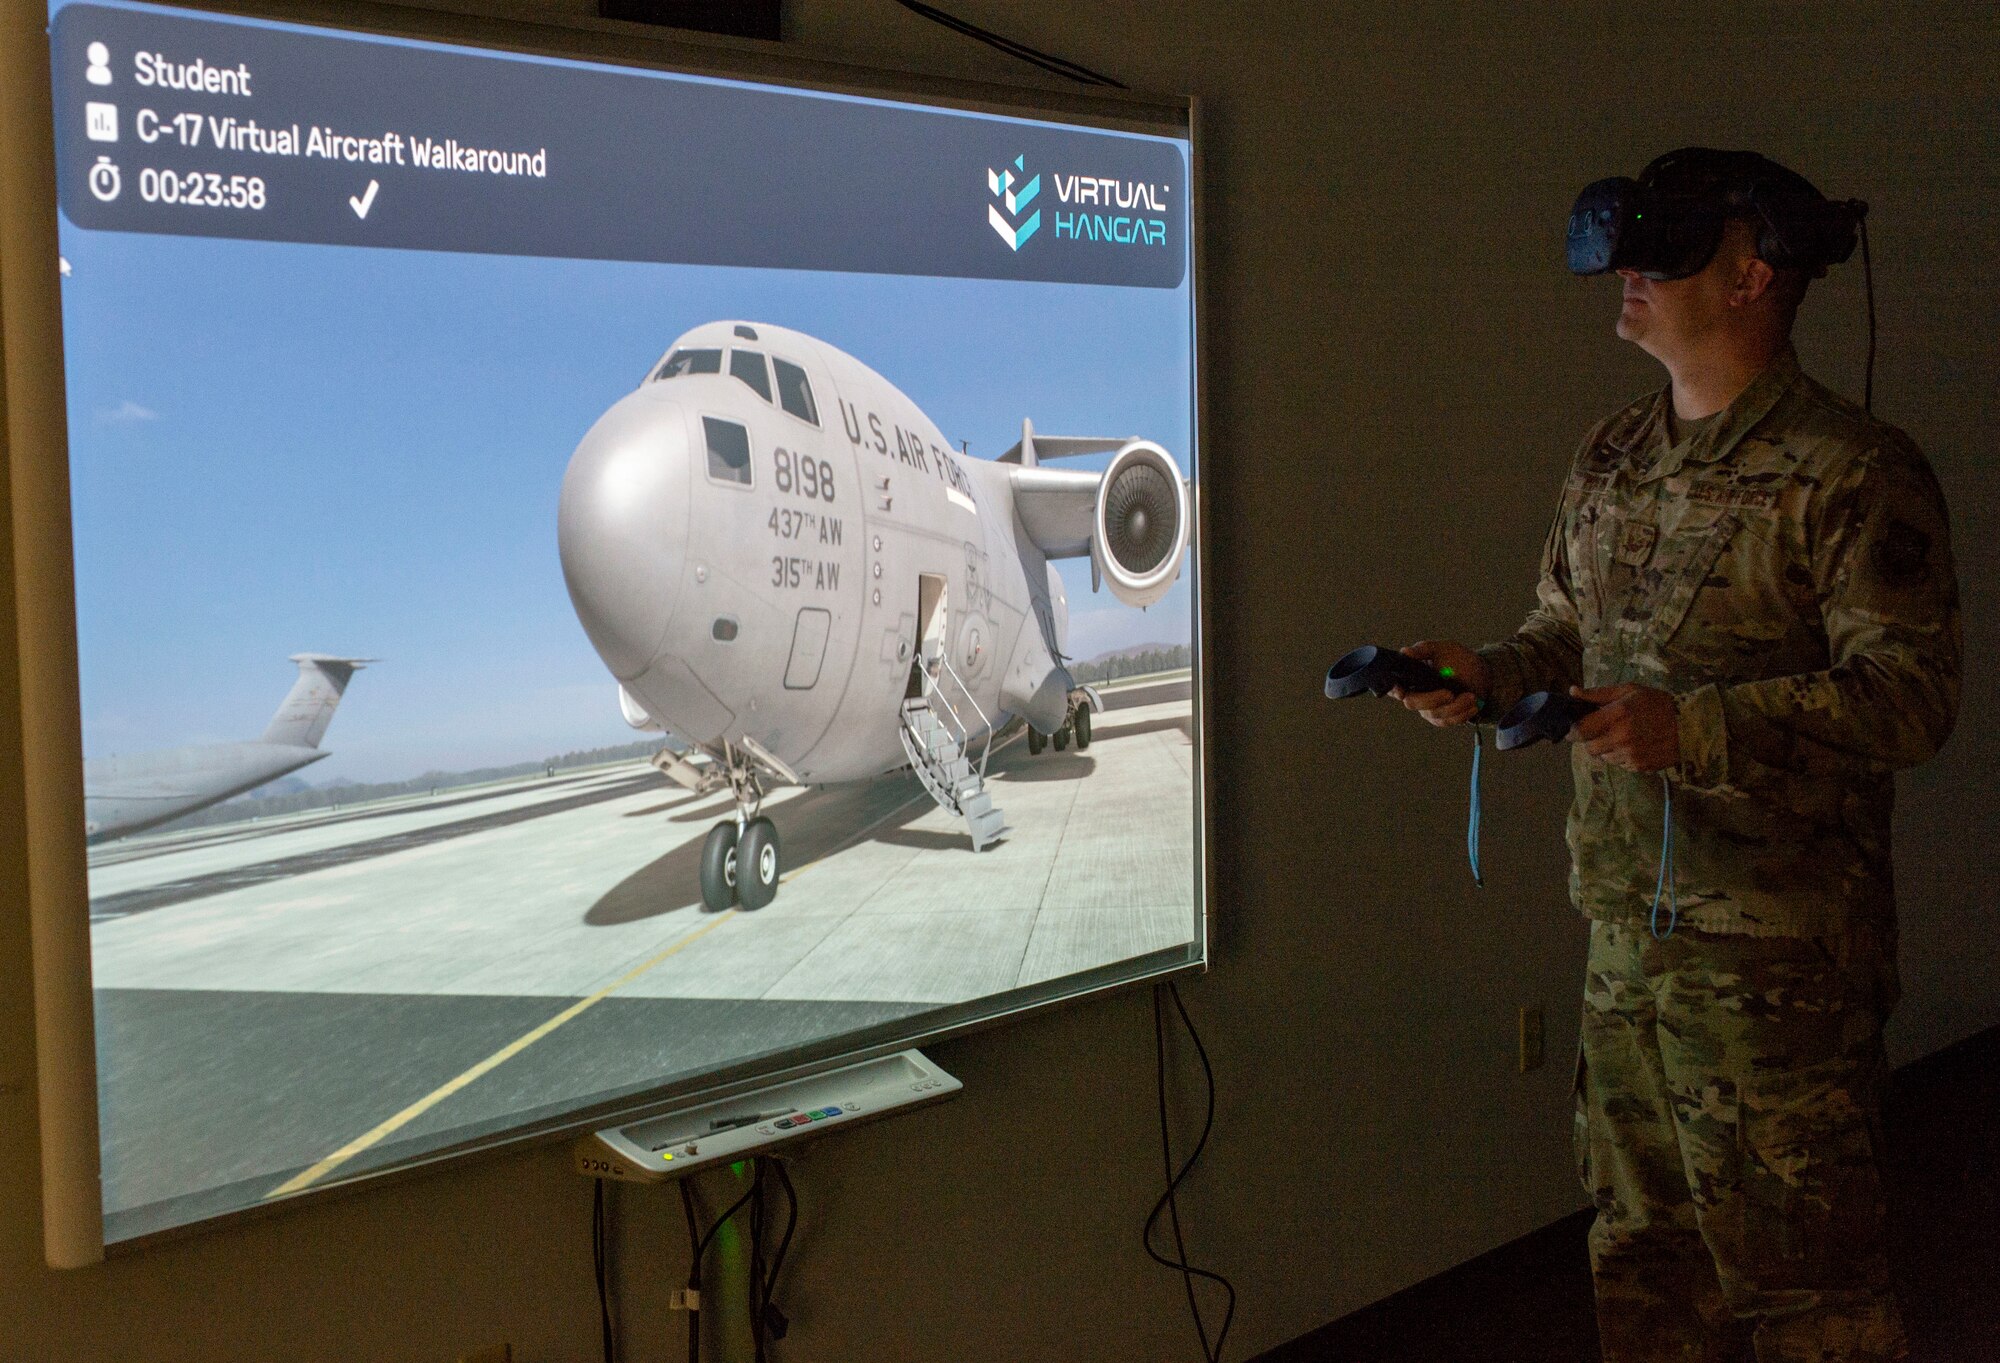 Staff Sgt. James Hart, 436th Aerial Port Squadron fleet services supervisor, walks around a C-17 Globemaster III using virtual reality goggles during a multi-capable Airmen training class at Dover Air Force Base, Delaware, March 29, 2022. Hart and other MCA students used VR goggles to familiarize themselves with C-17 and C-5M Super Galaxy aircraft by performing a virtual walkaround. (U.S. Air Force photo by Roland Balik)